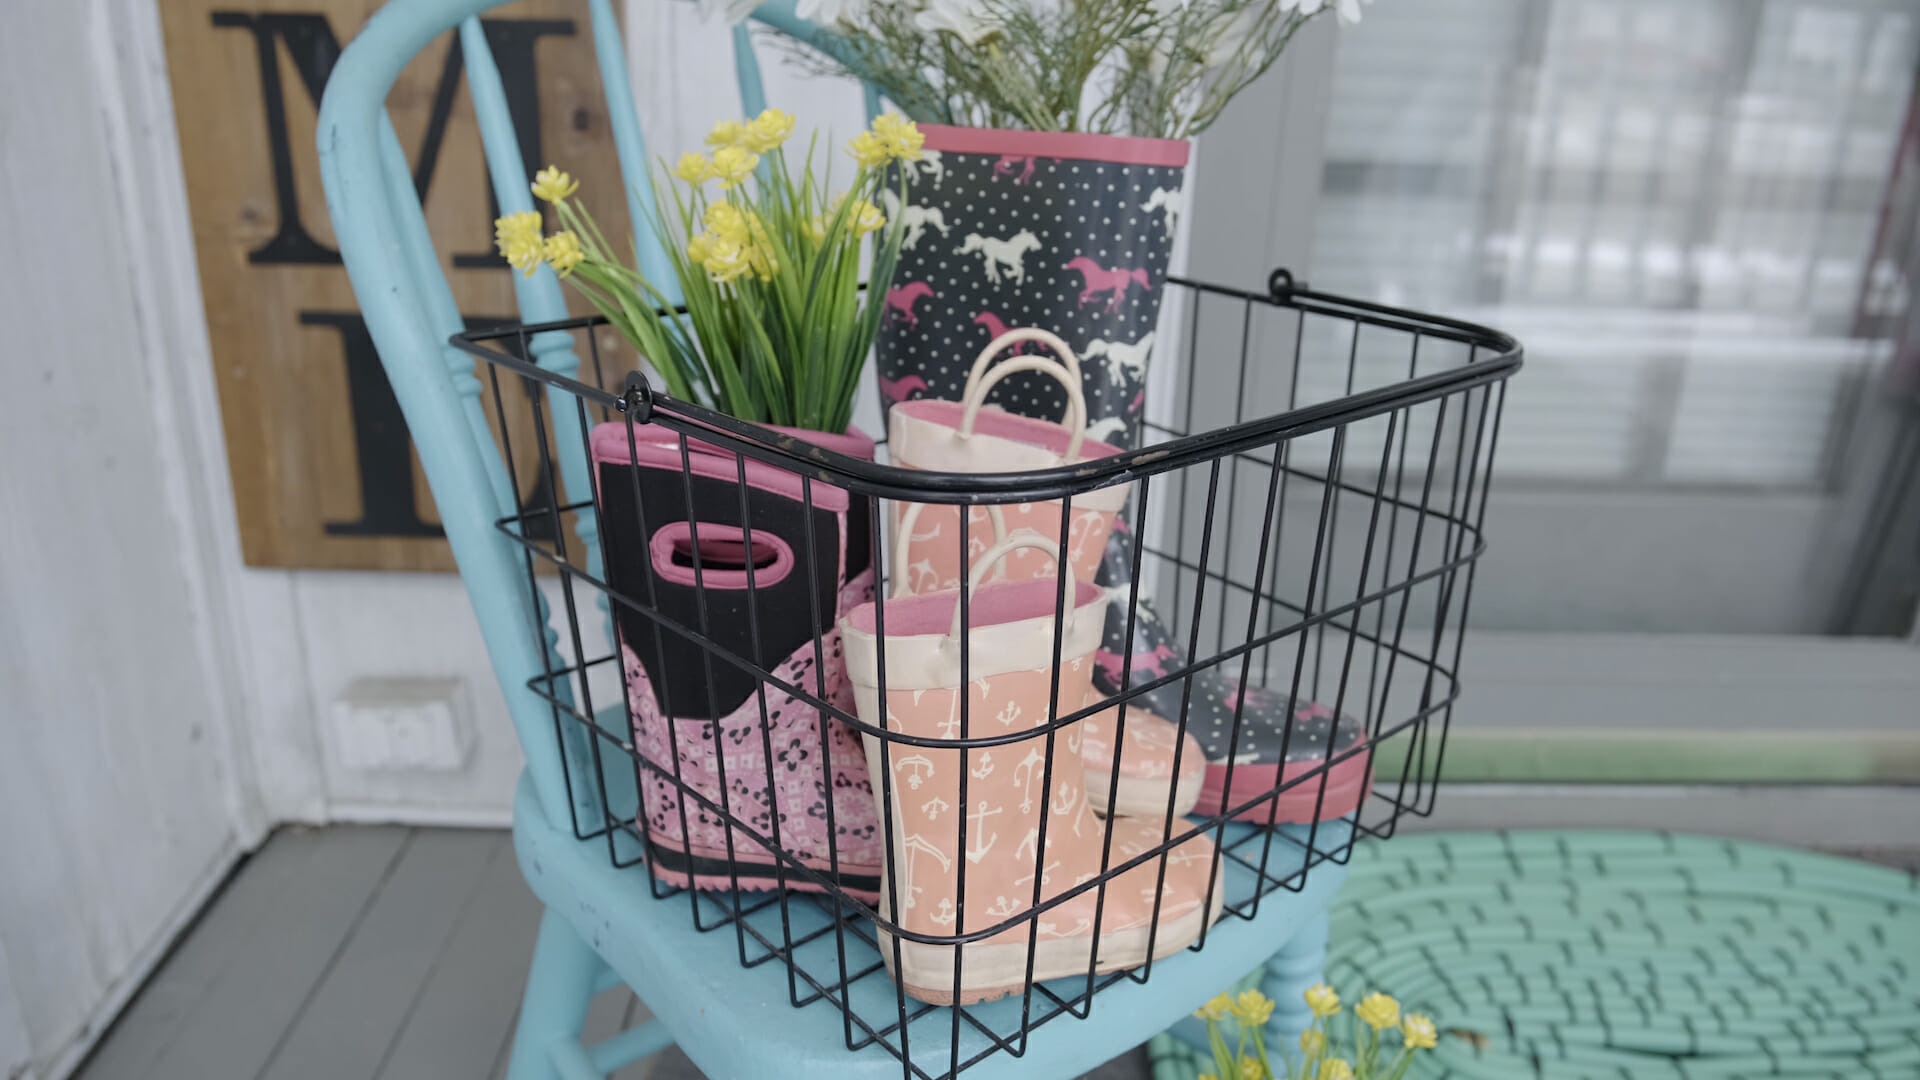 black basket on chair full of rubber rain boots with flowers for a spring themed front porch